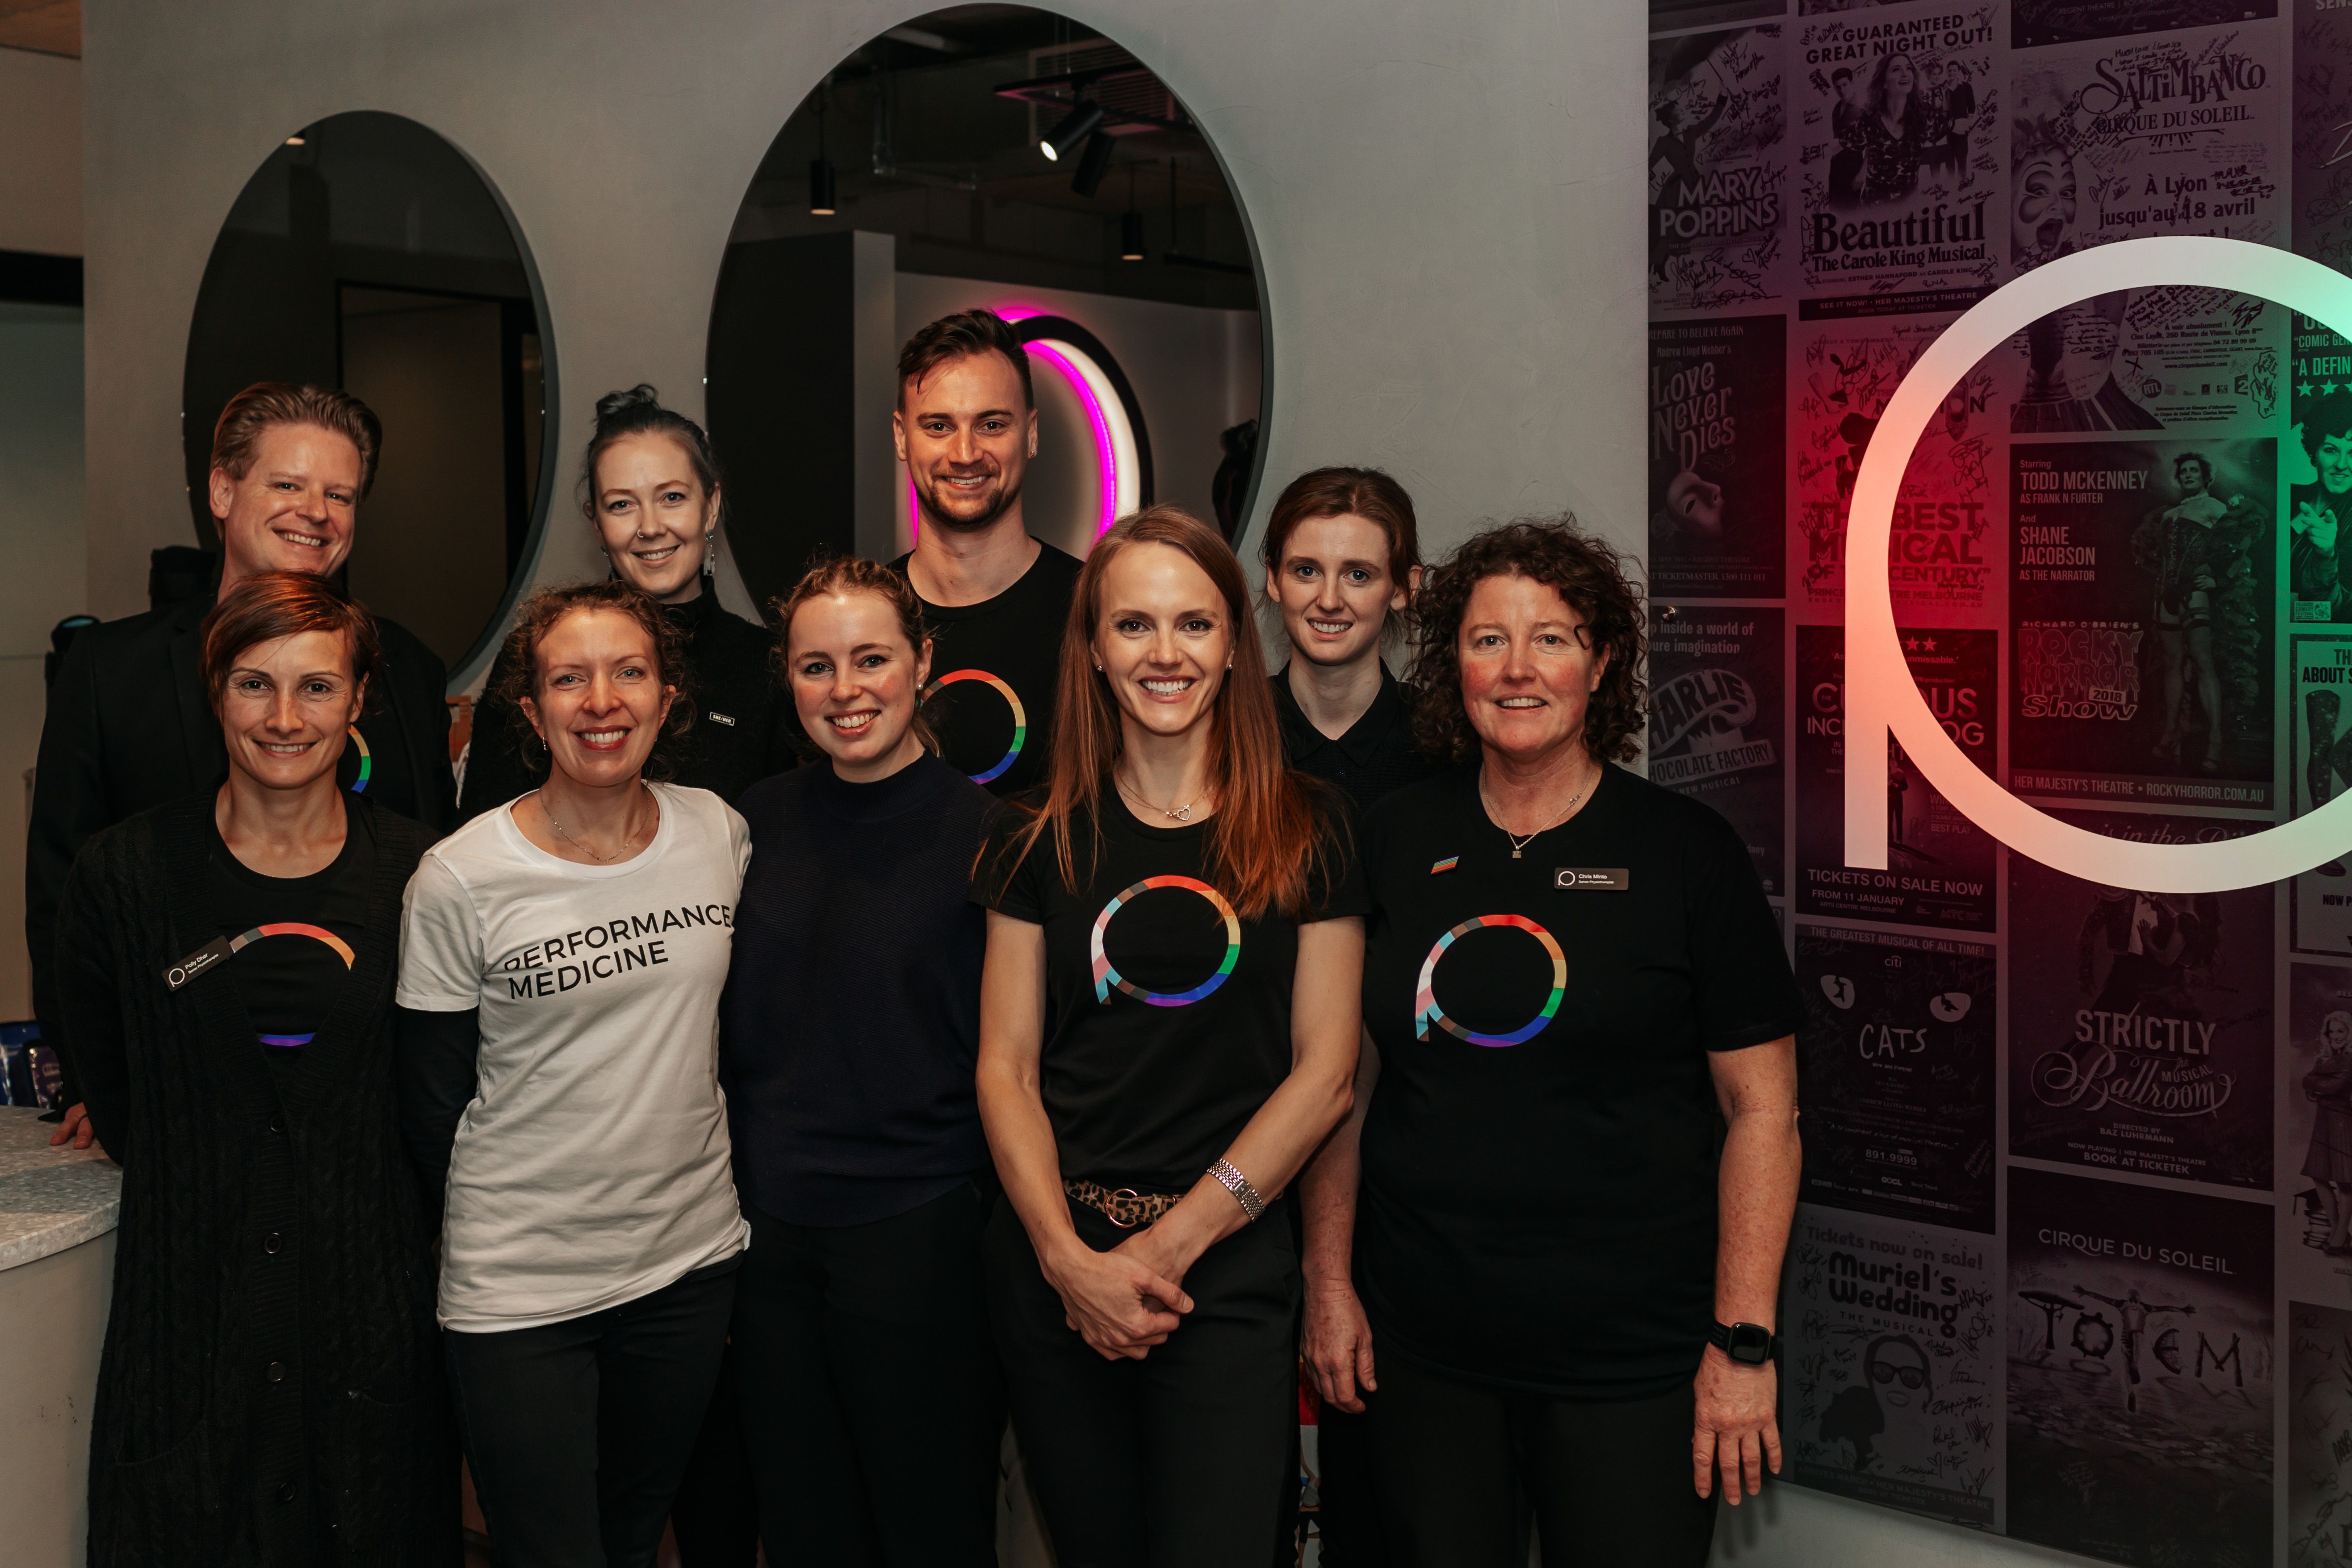 The team of physiotherapists, myotherapists and massage therapists at Performance Medicine